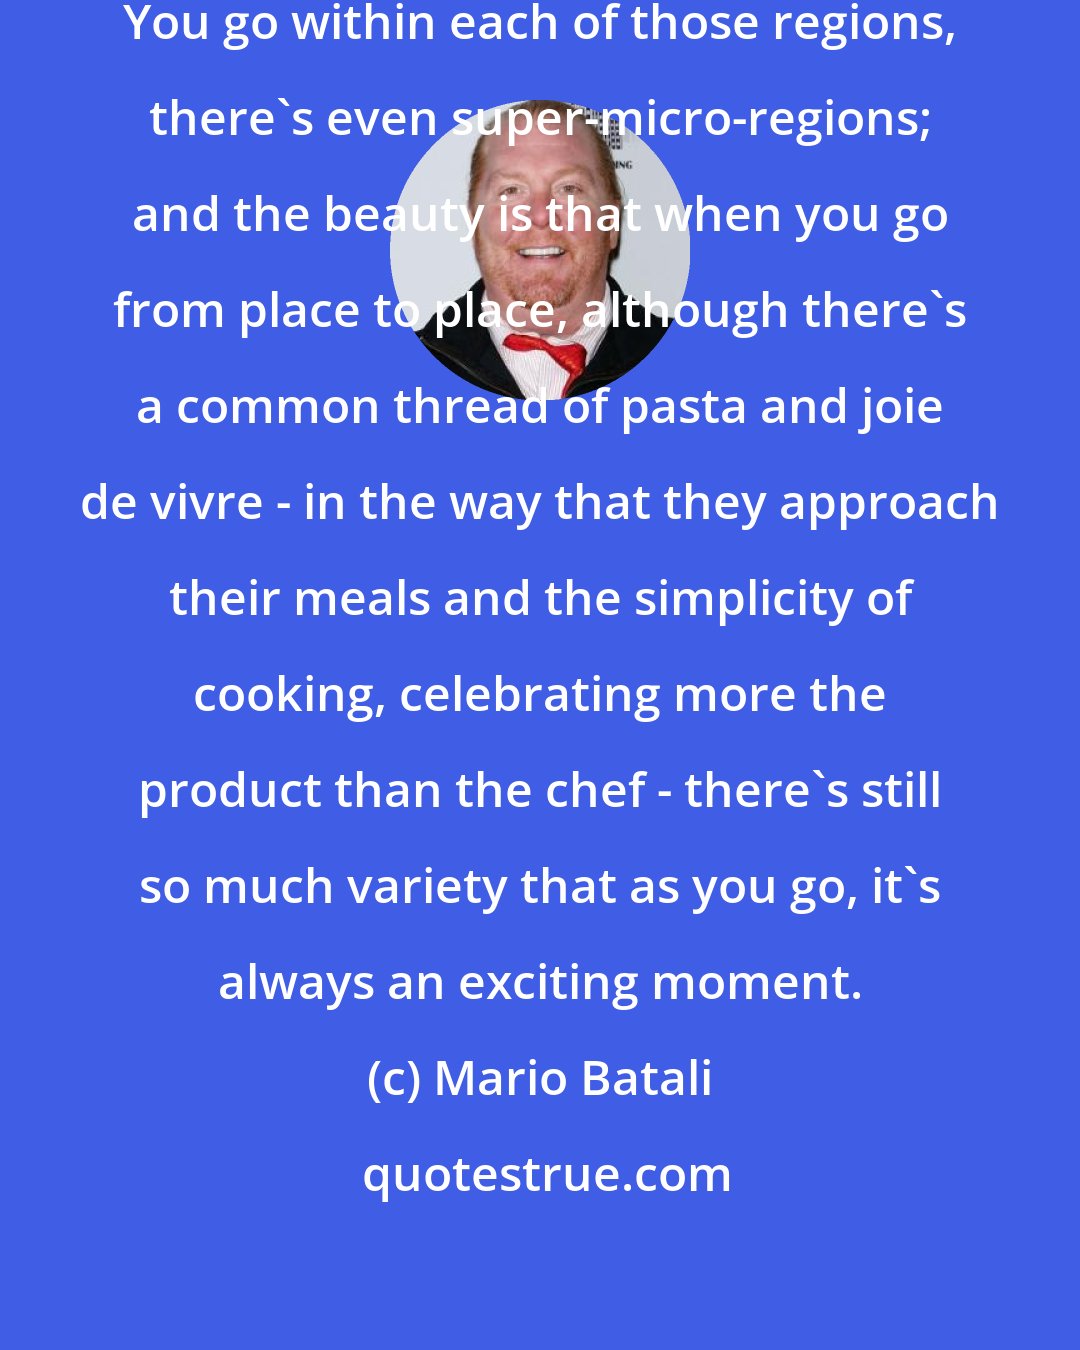 Mario Batali: Italy itself has 21 different micro-regions. You go within each of those regions, there's even super-micro-regions; and the beauty is that when you go from place to place, although there's a common thread of pasta and joie de vivre - in the way that they approach their meals and the simplicity of cooking, celebrating more the product than the chef - there's still so much variety that as you go, it's always an exciting moment.